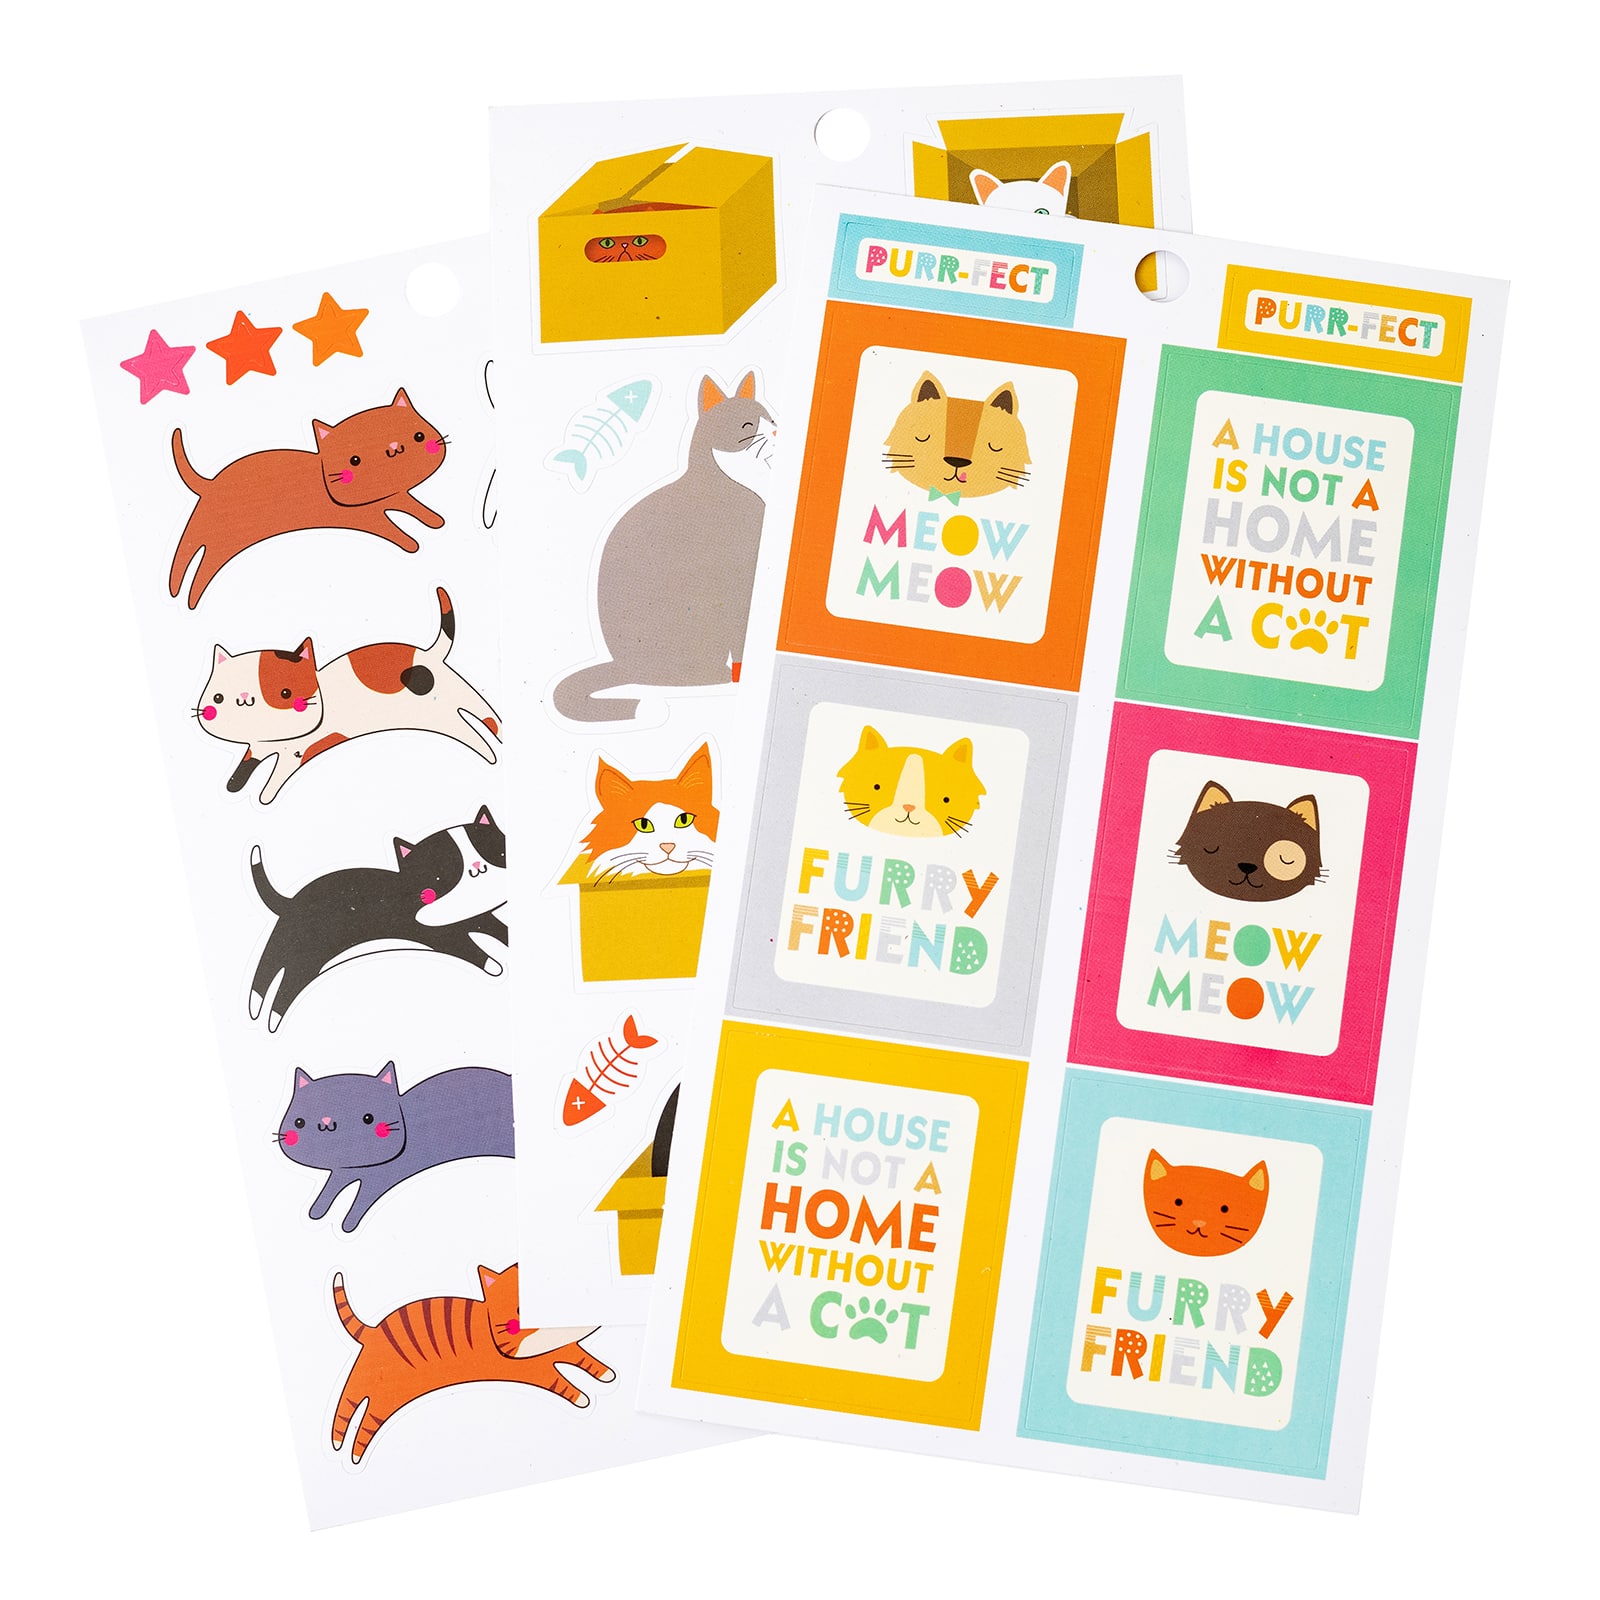 Stickers Cats Graphic by MerchSuperb · Creative Fabrica